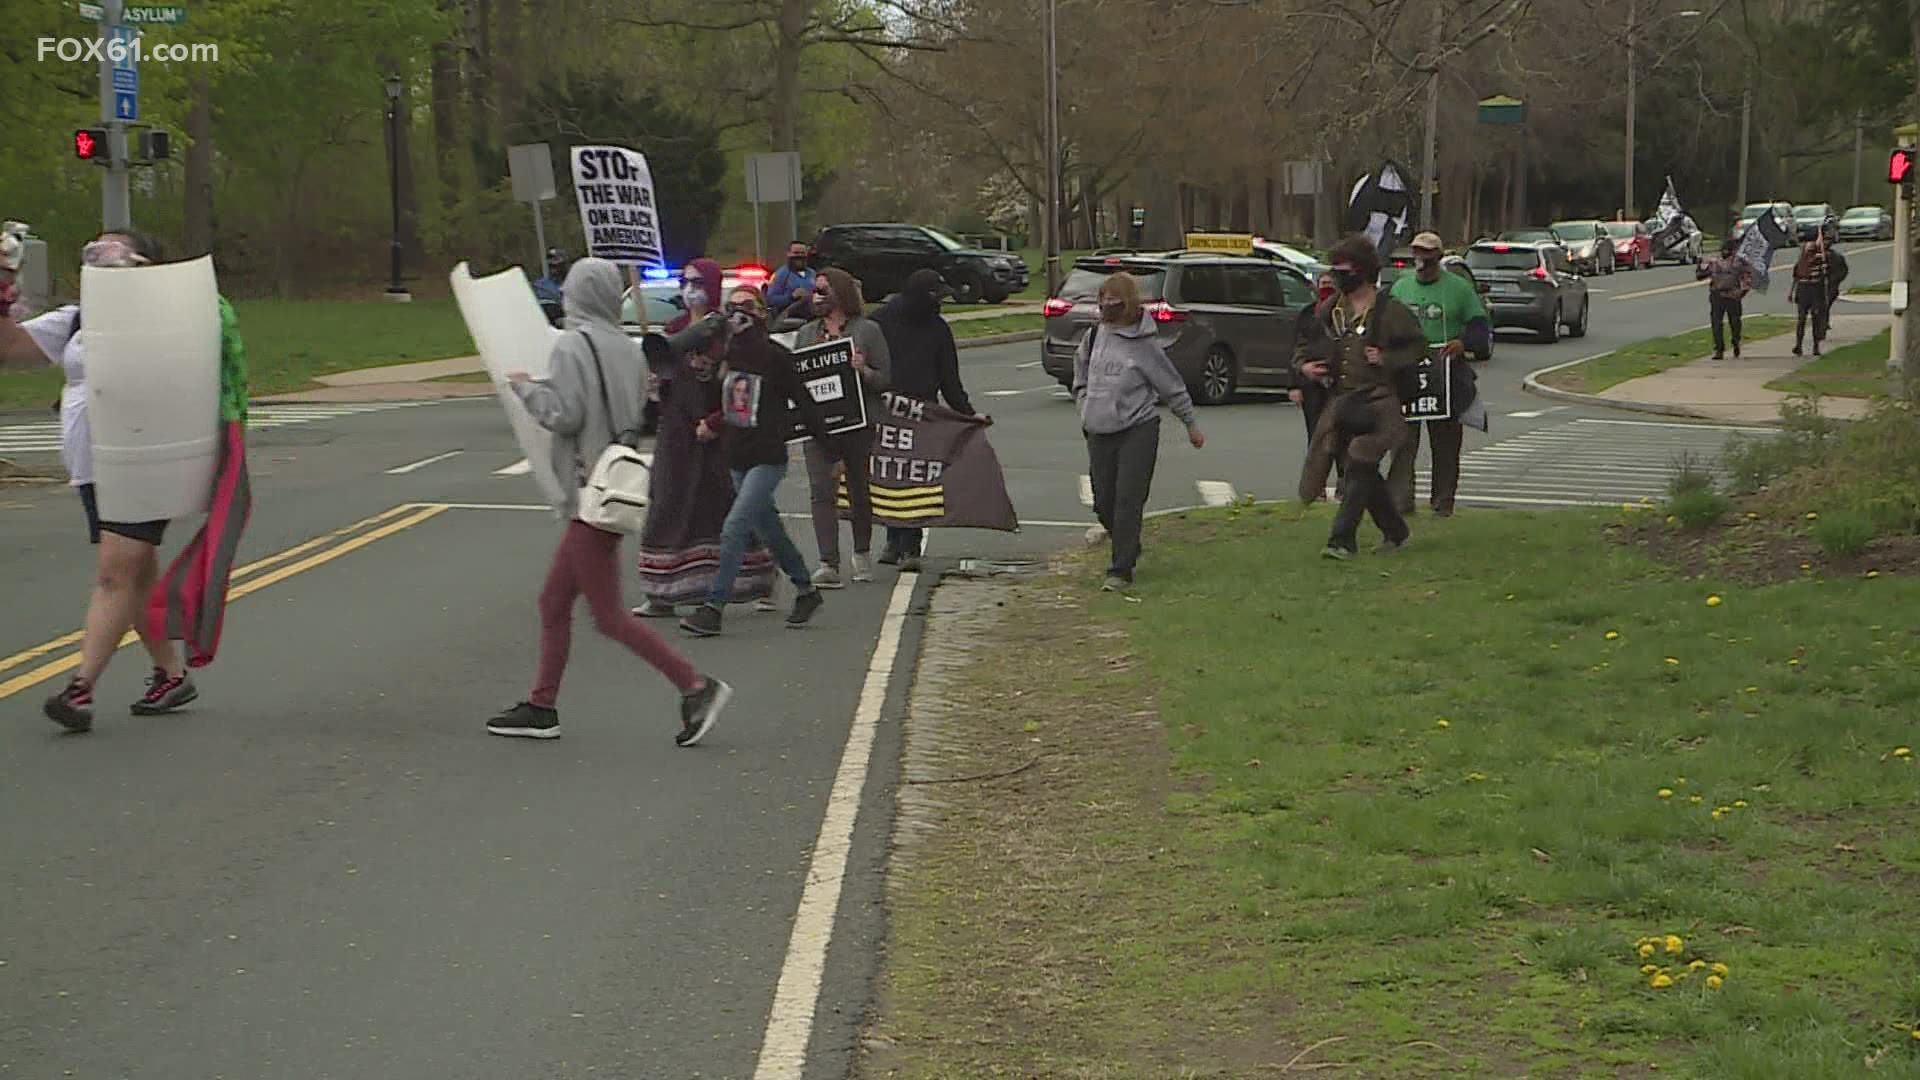 Protesters took to the streets after Derek Chauvin was found guilty on all three counts. They say they want peers in the suburbs to get involved.